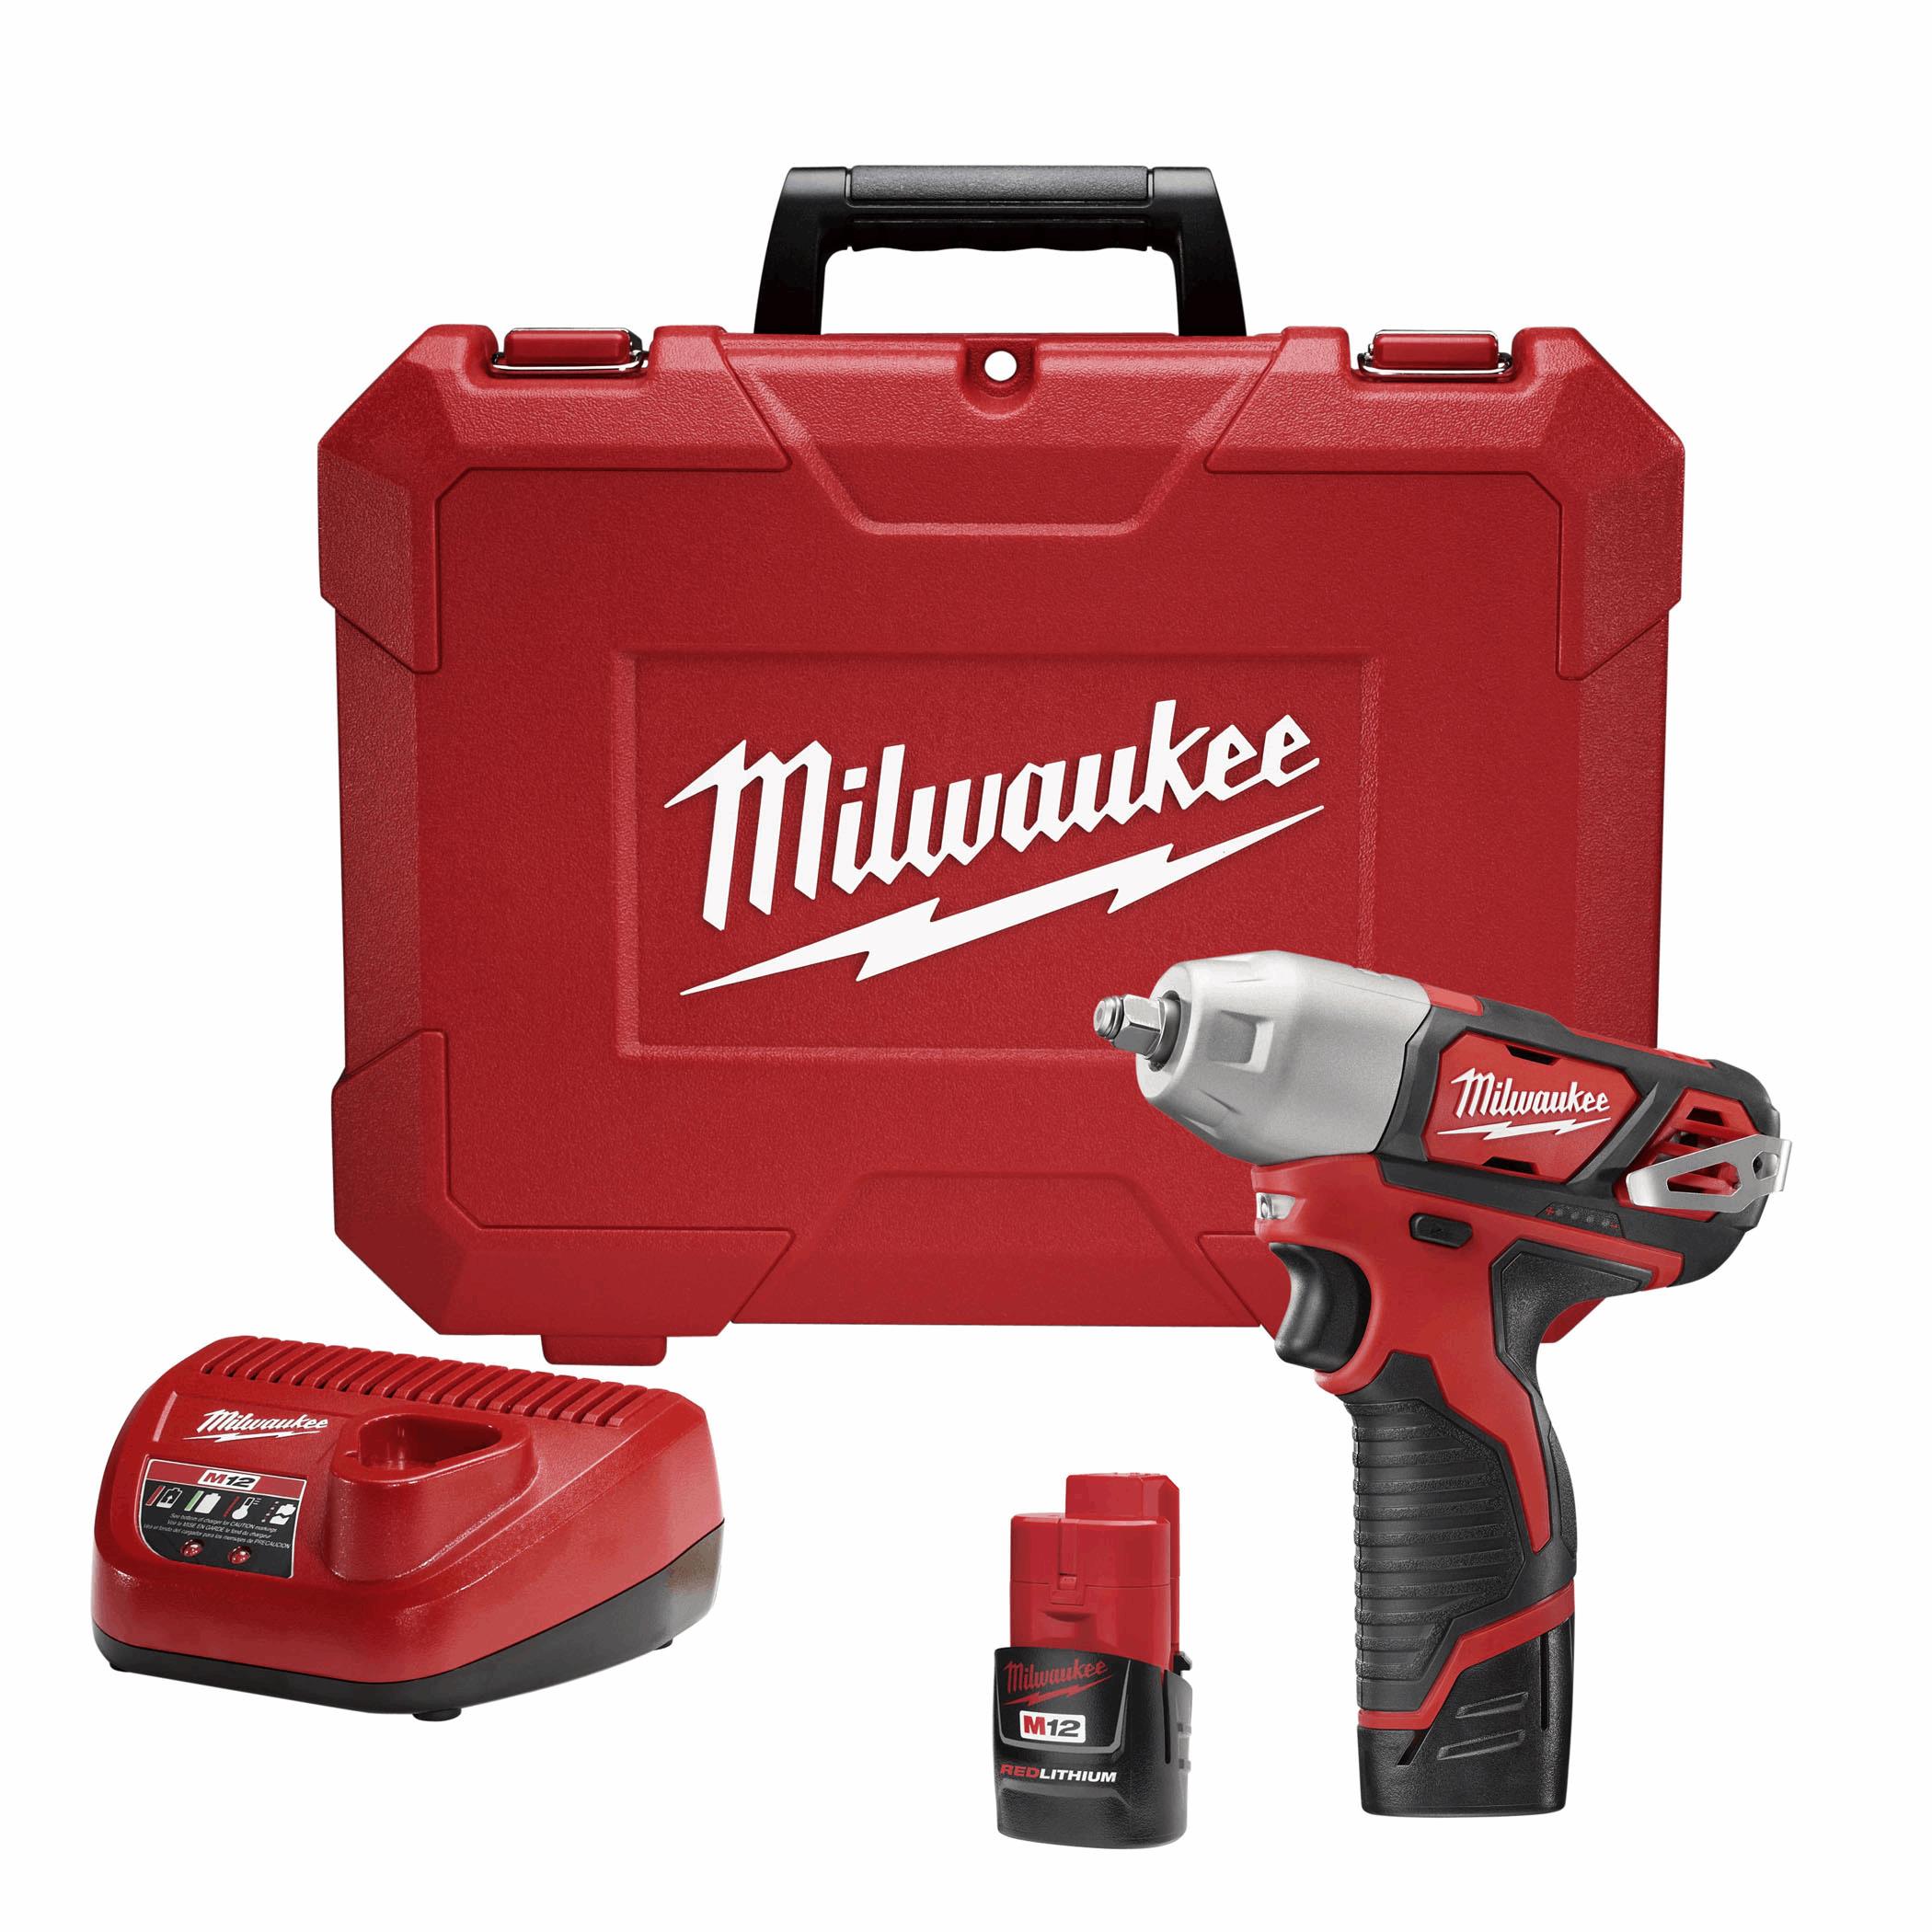 12-volt 3/8 Inch Impact Wrench Kit